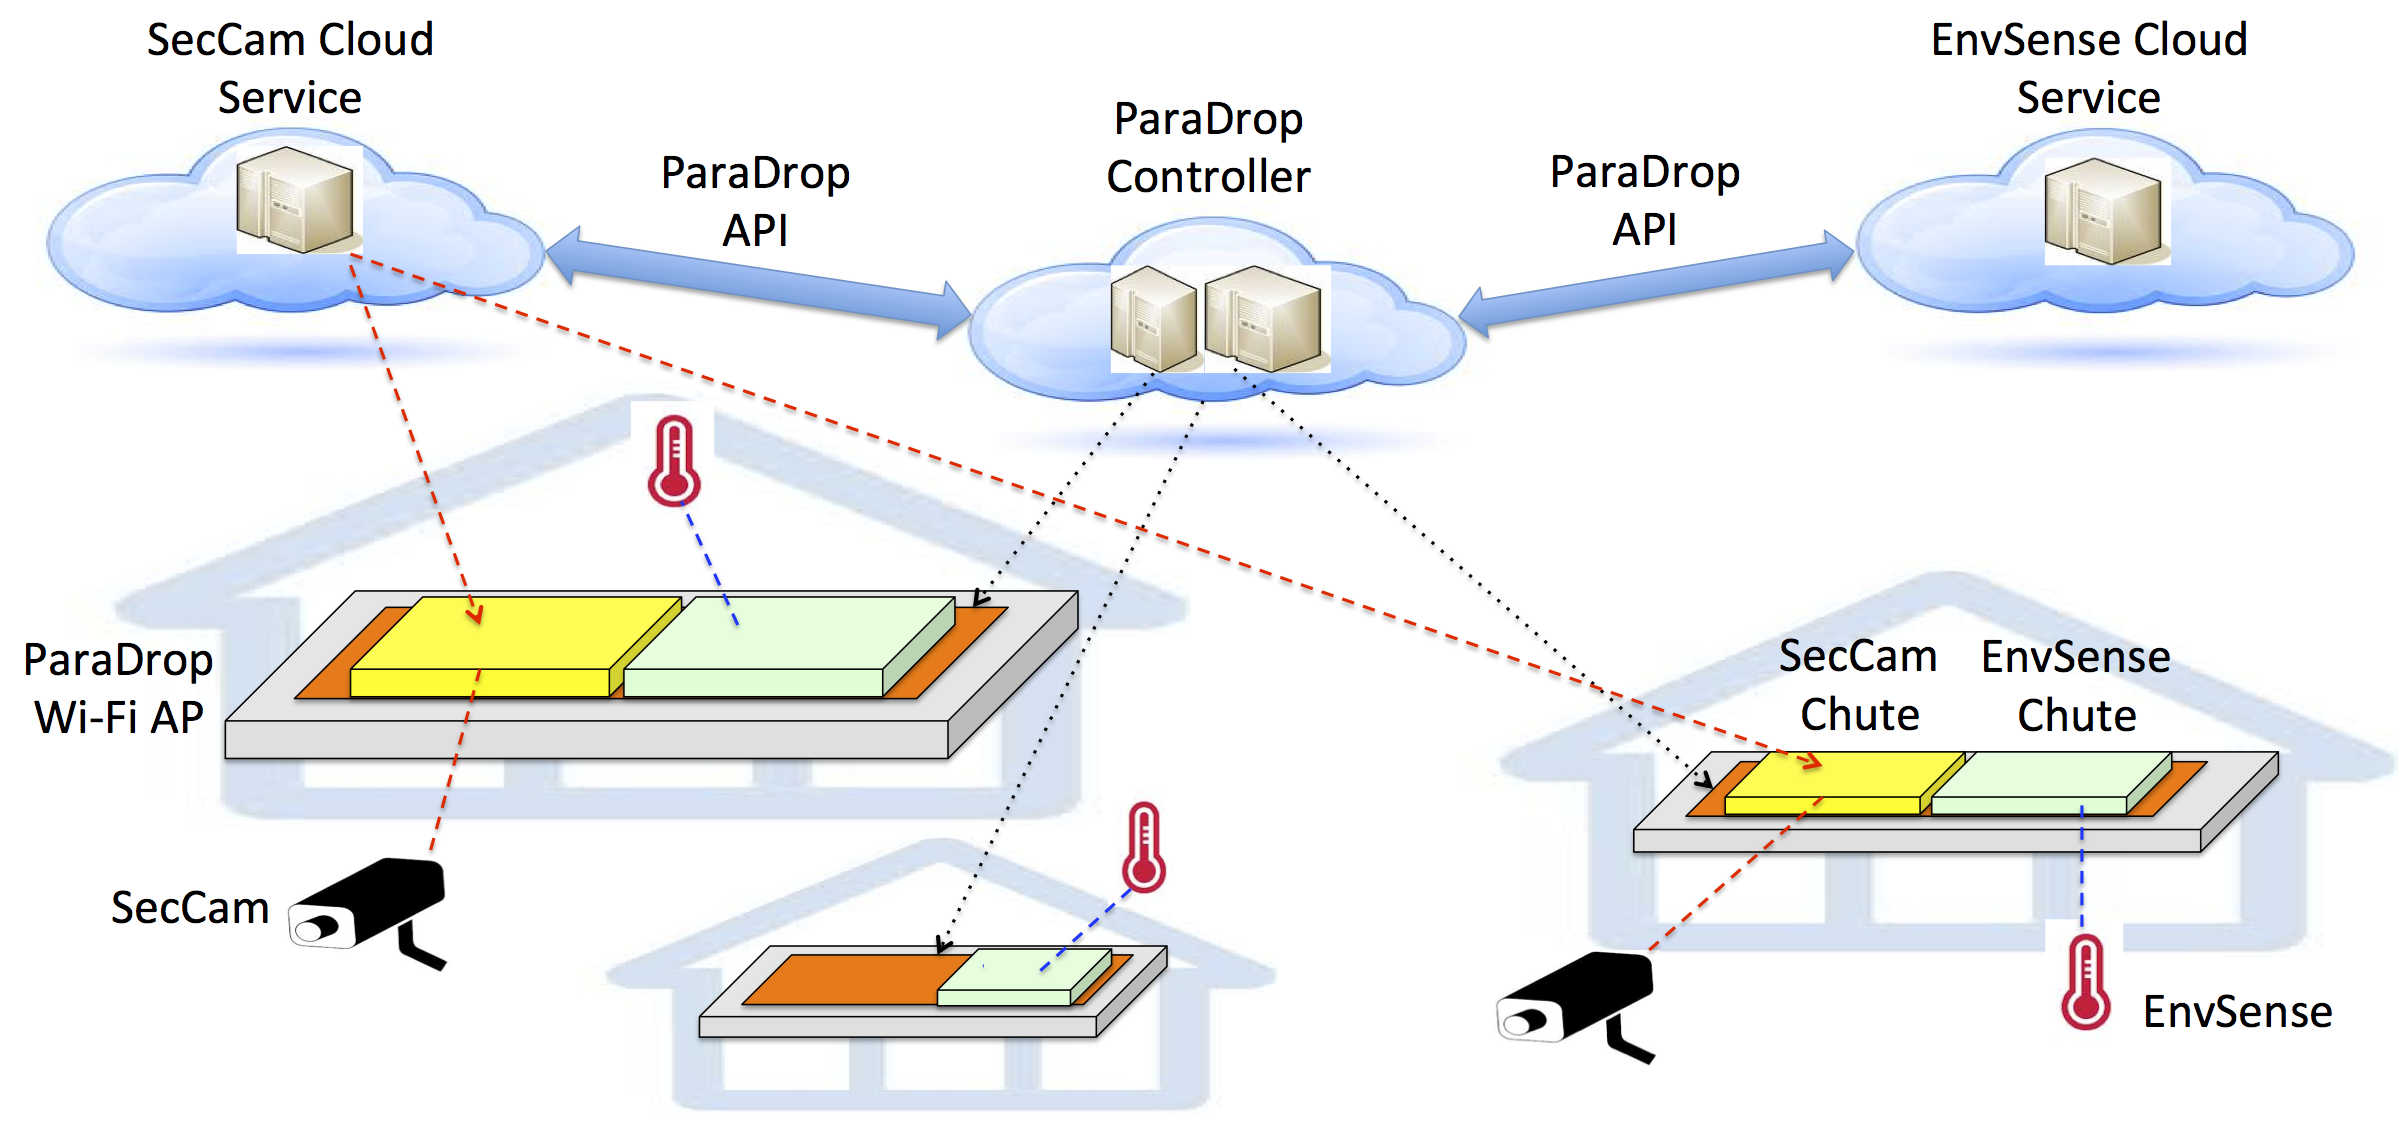 Figure showing applications running on Paradrop